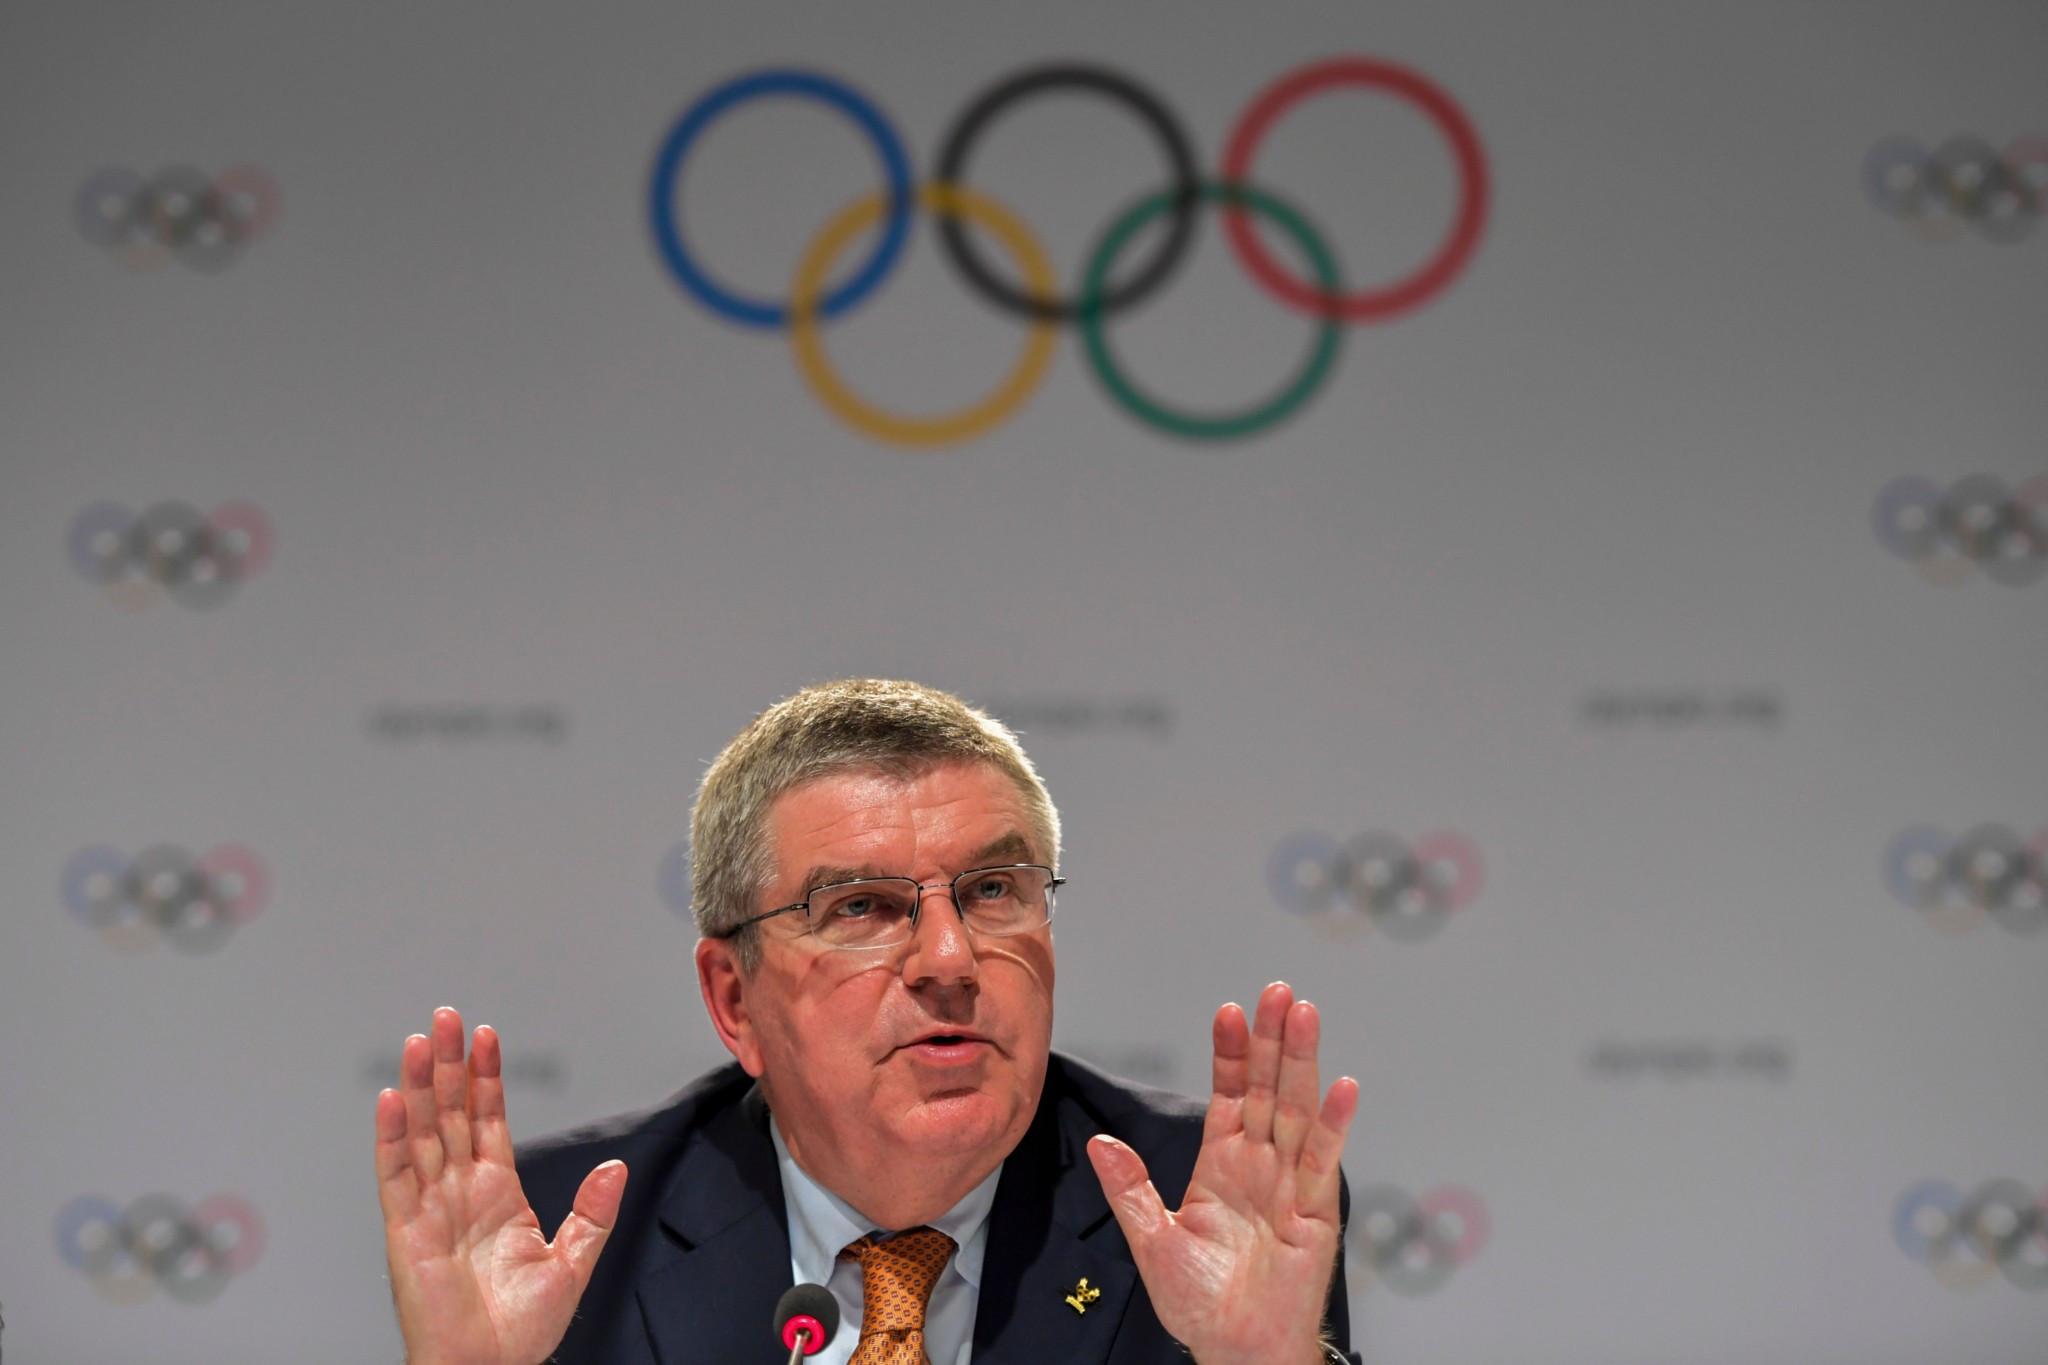 IOC President Thomas Bach has appealed to NHL owners to allow players from their teams to compete at Pyeongchang 2018 ©Getty Images